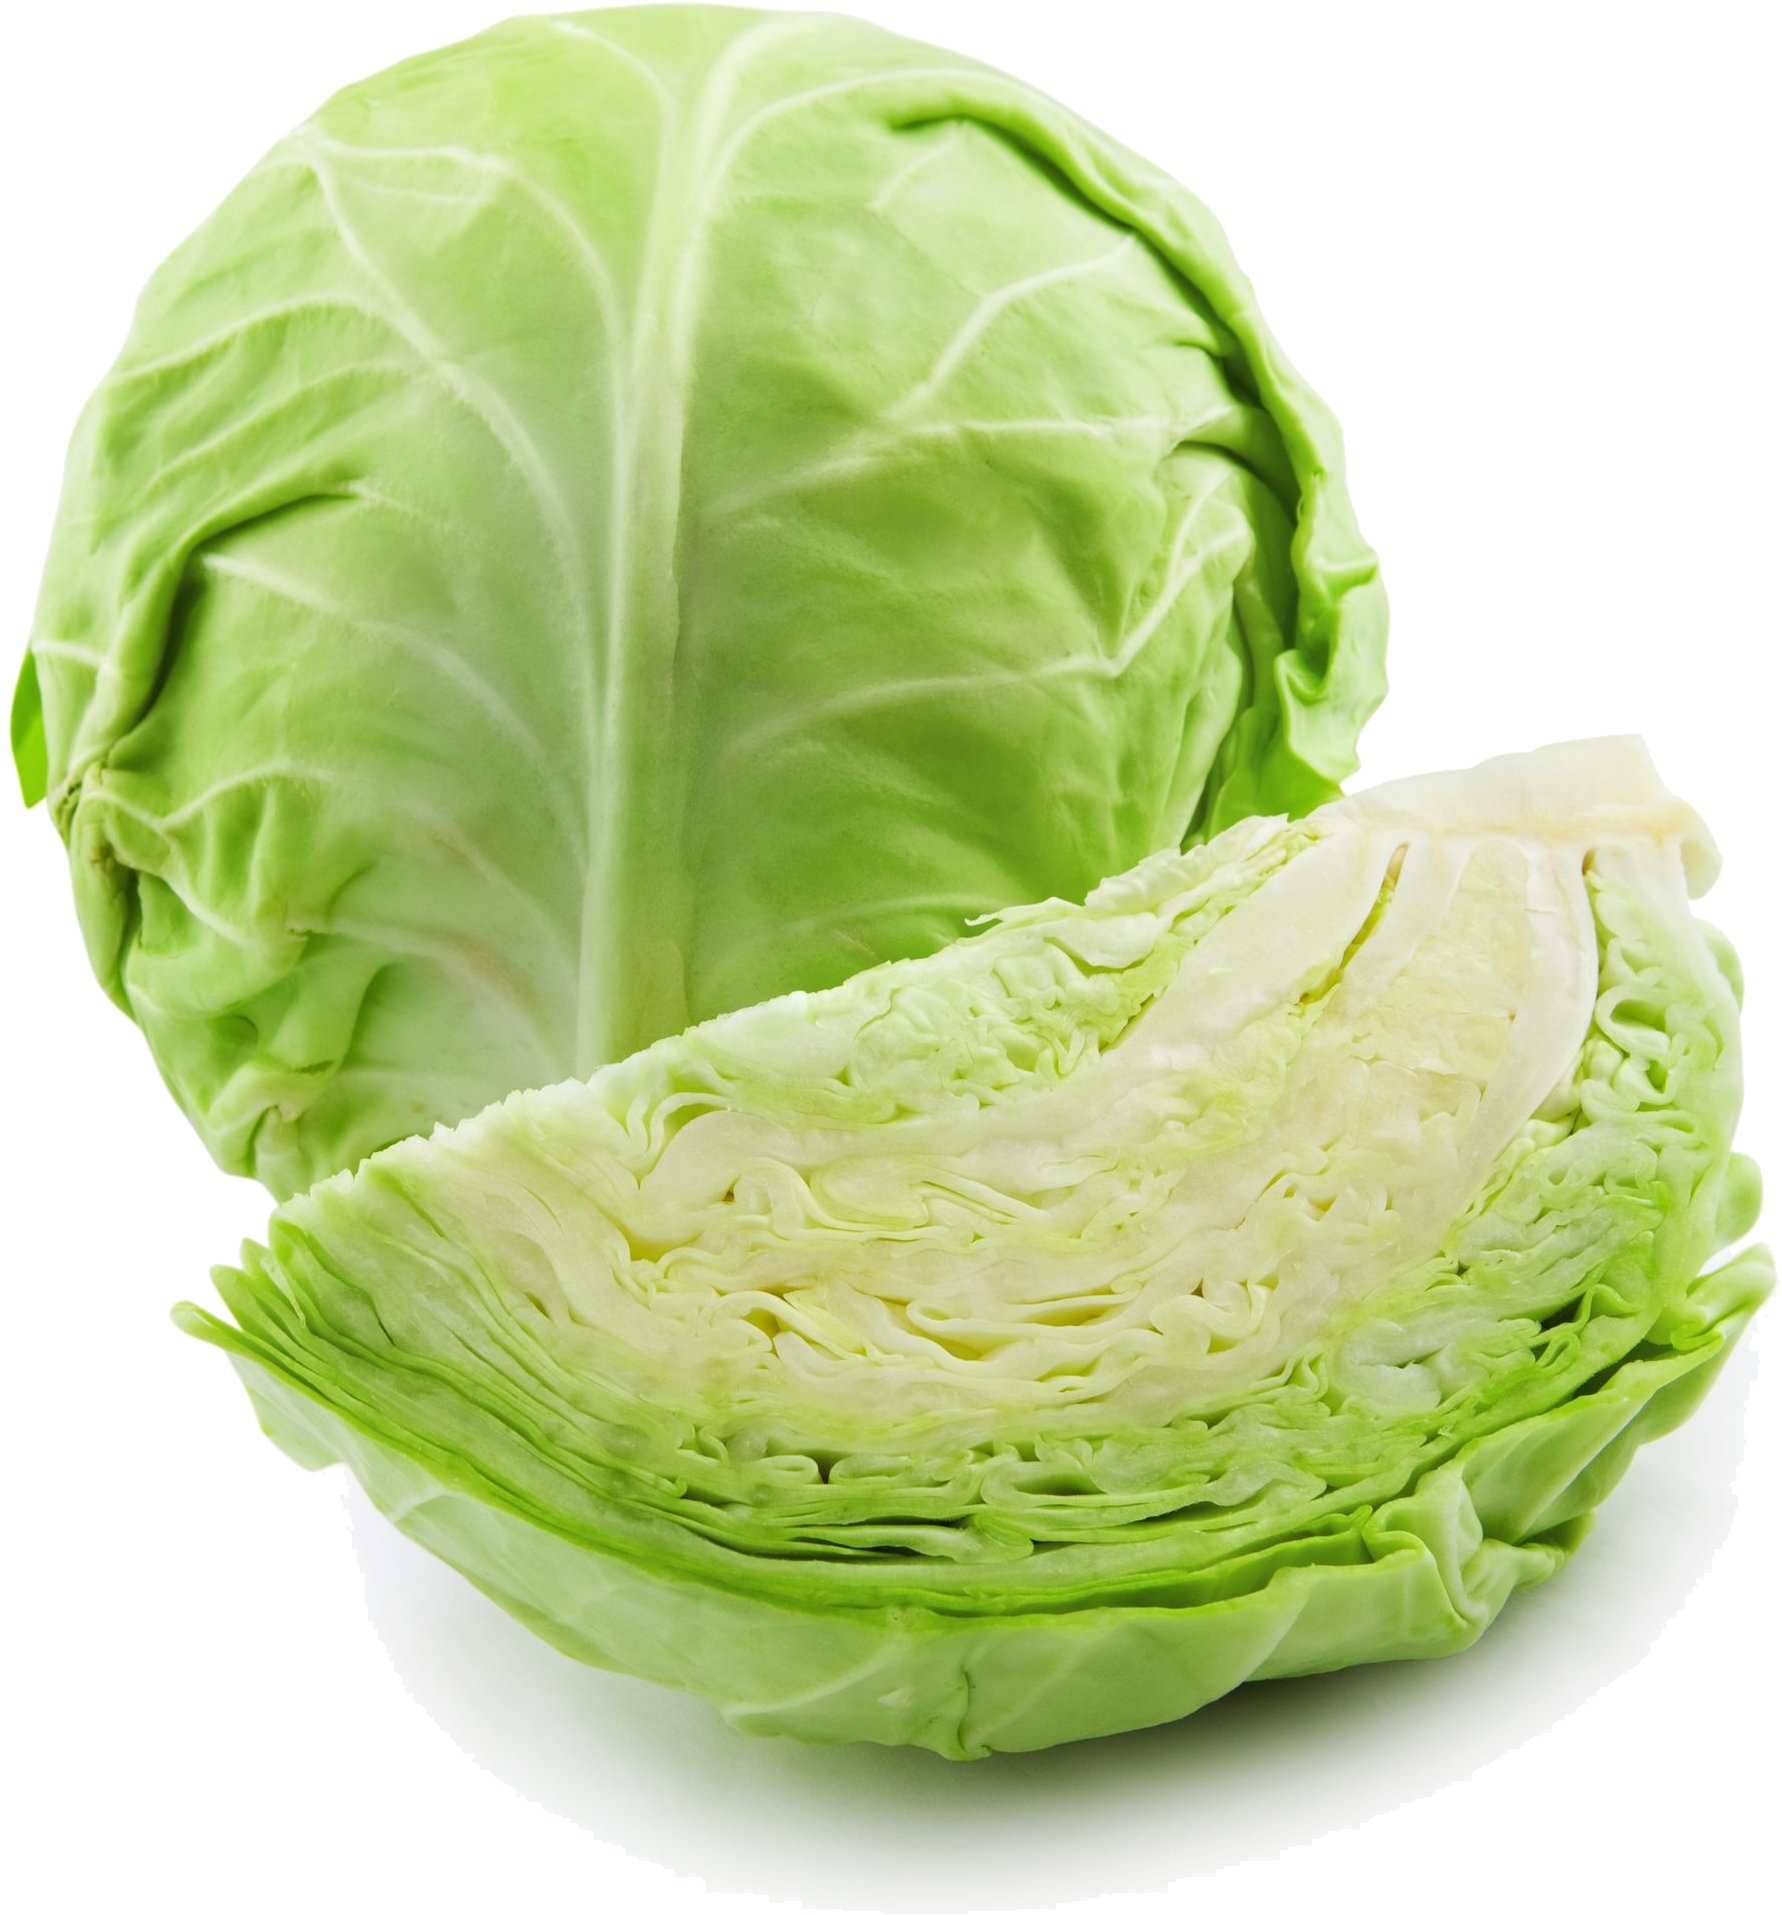 A Head Of Cabbage And A Half Of It